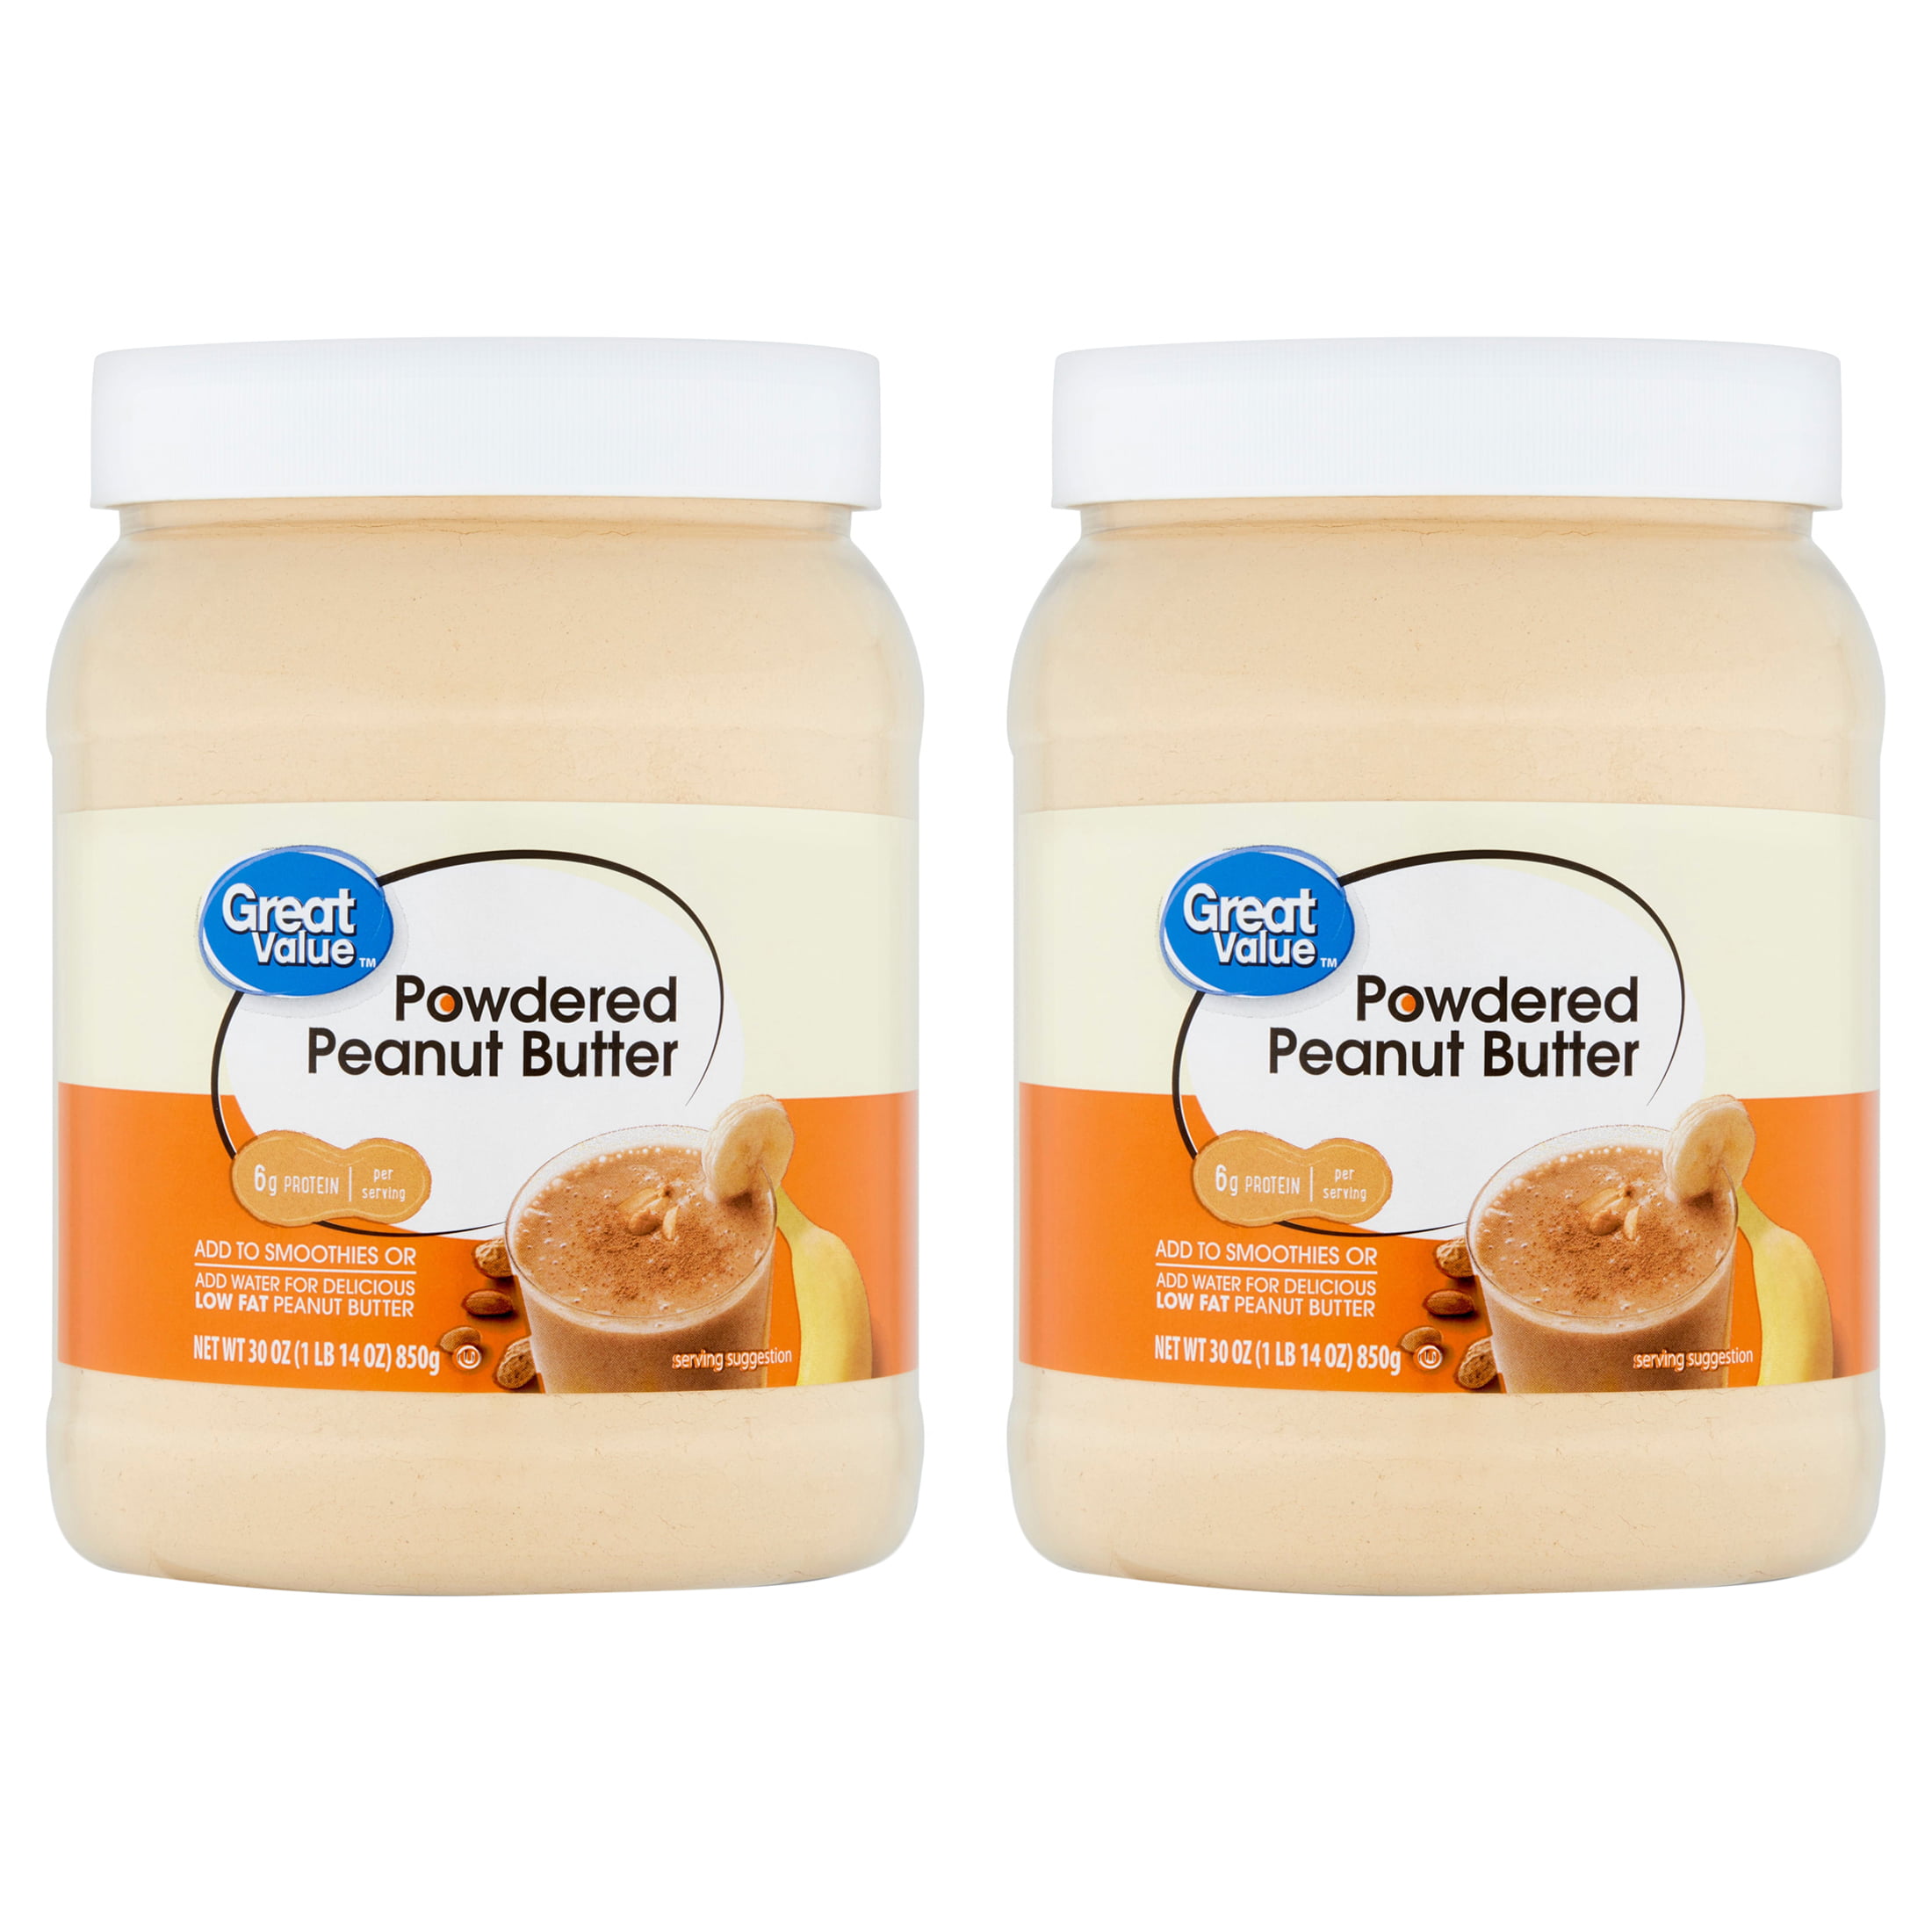 (2 pack) Great Value Powdered Peanut Butter, 30 oz